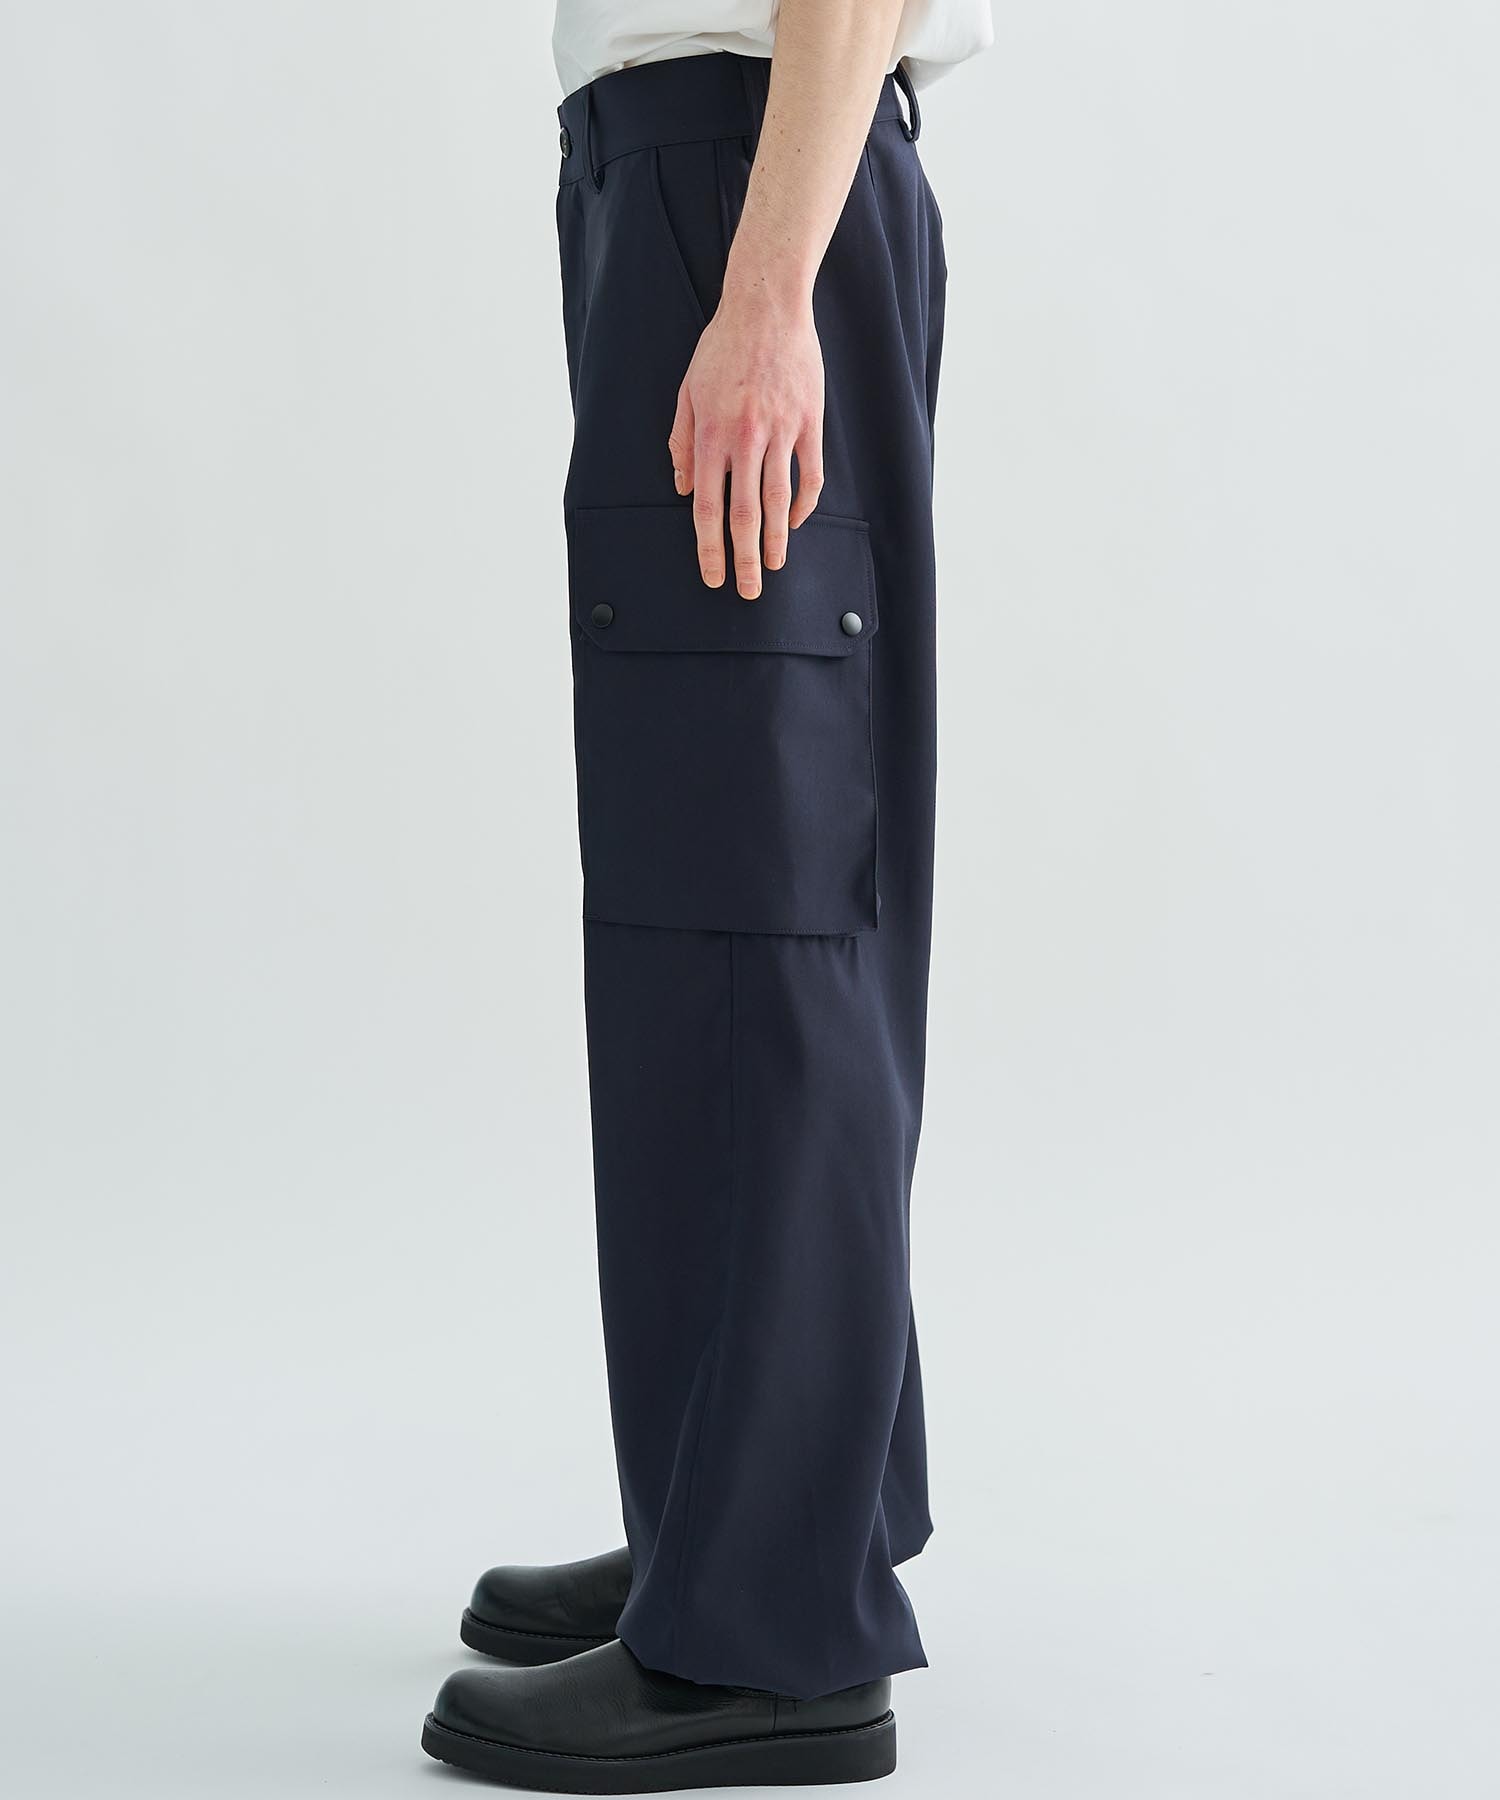 RERACS FRENCH ARMY F2 CARGO PANTS(46 NAVY): THE RERACS: MENS 